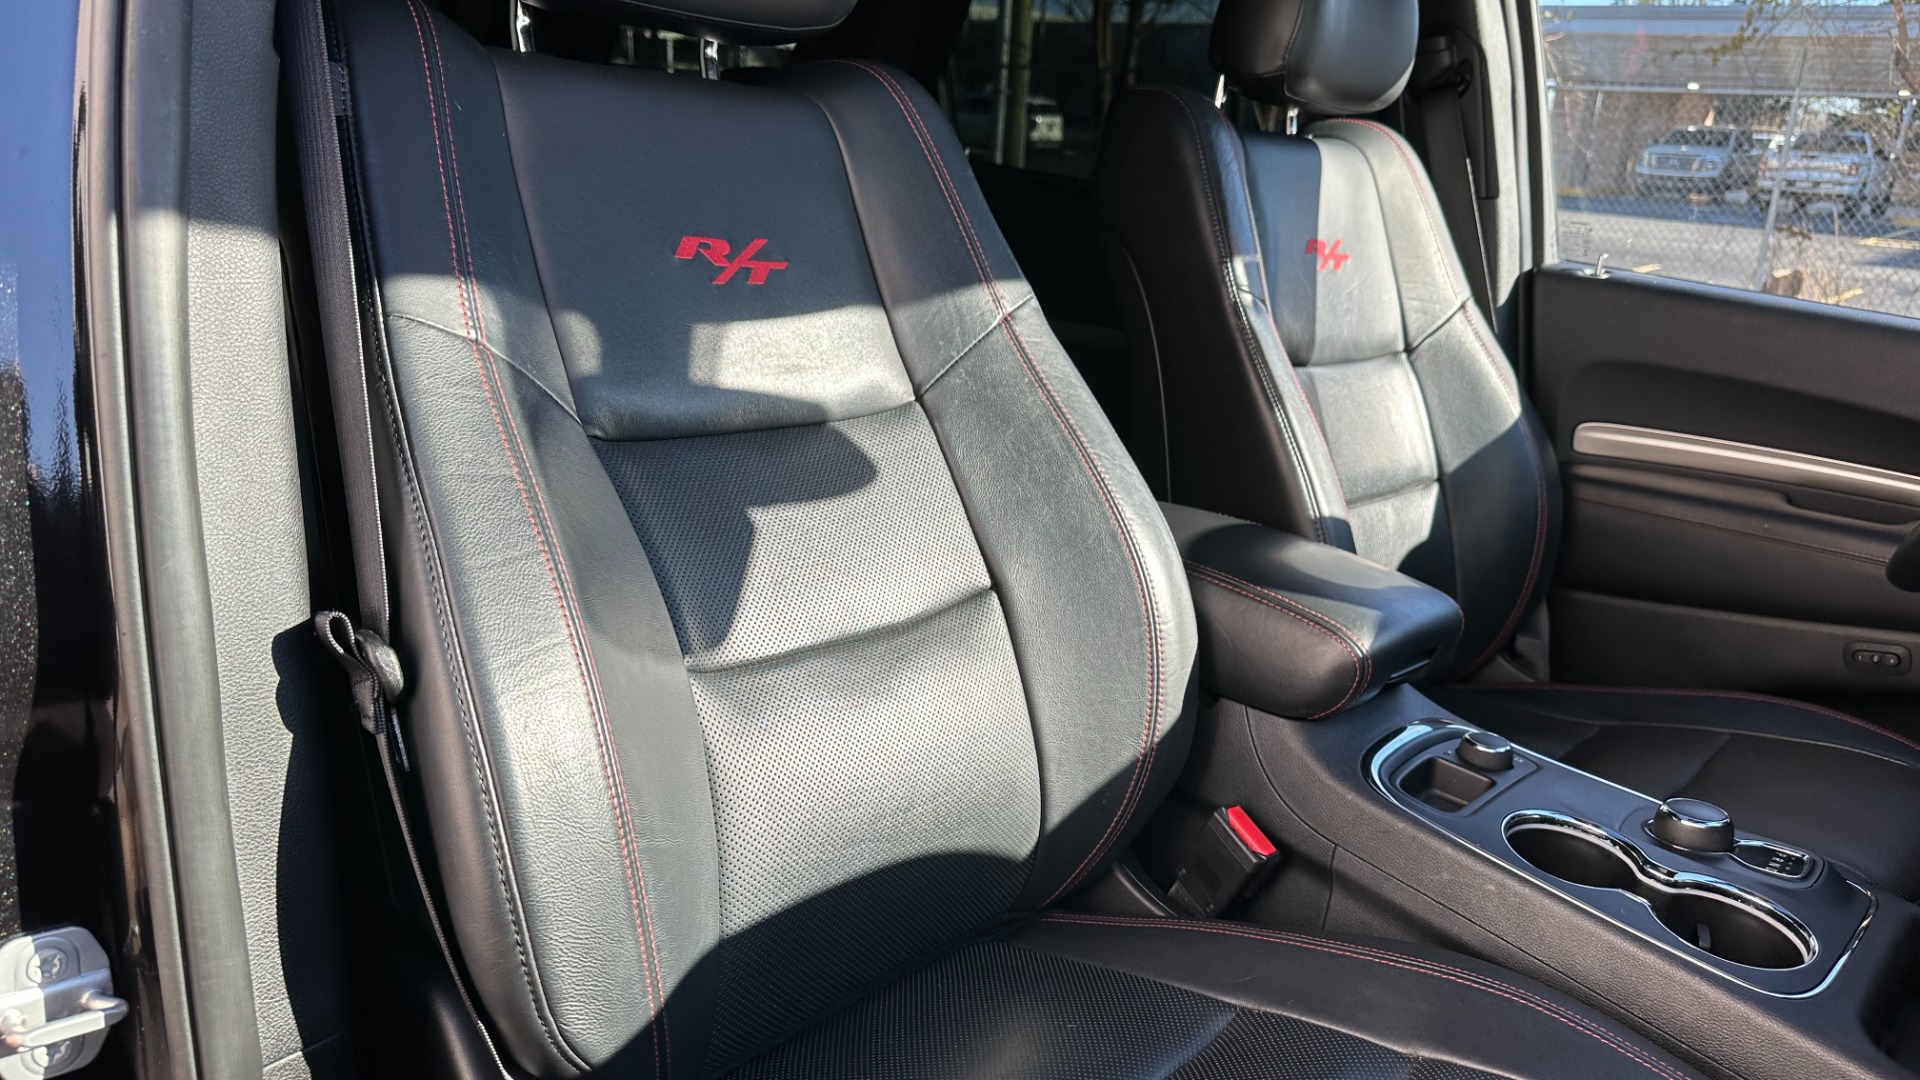 Used 2015 Dodge Durango R/T / HEMI V8 / CAPTAINS CHAIRS / 3 ROW SEATING / TECH PKG / NAPPA LEATHER  for sale Sold at Formula Imports in Charlotte NC 28227 42